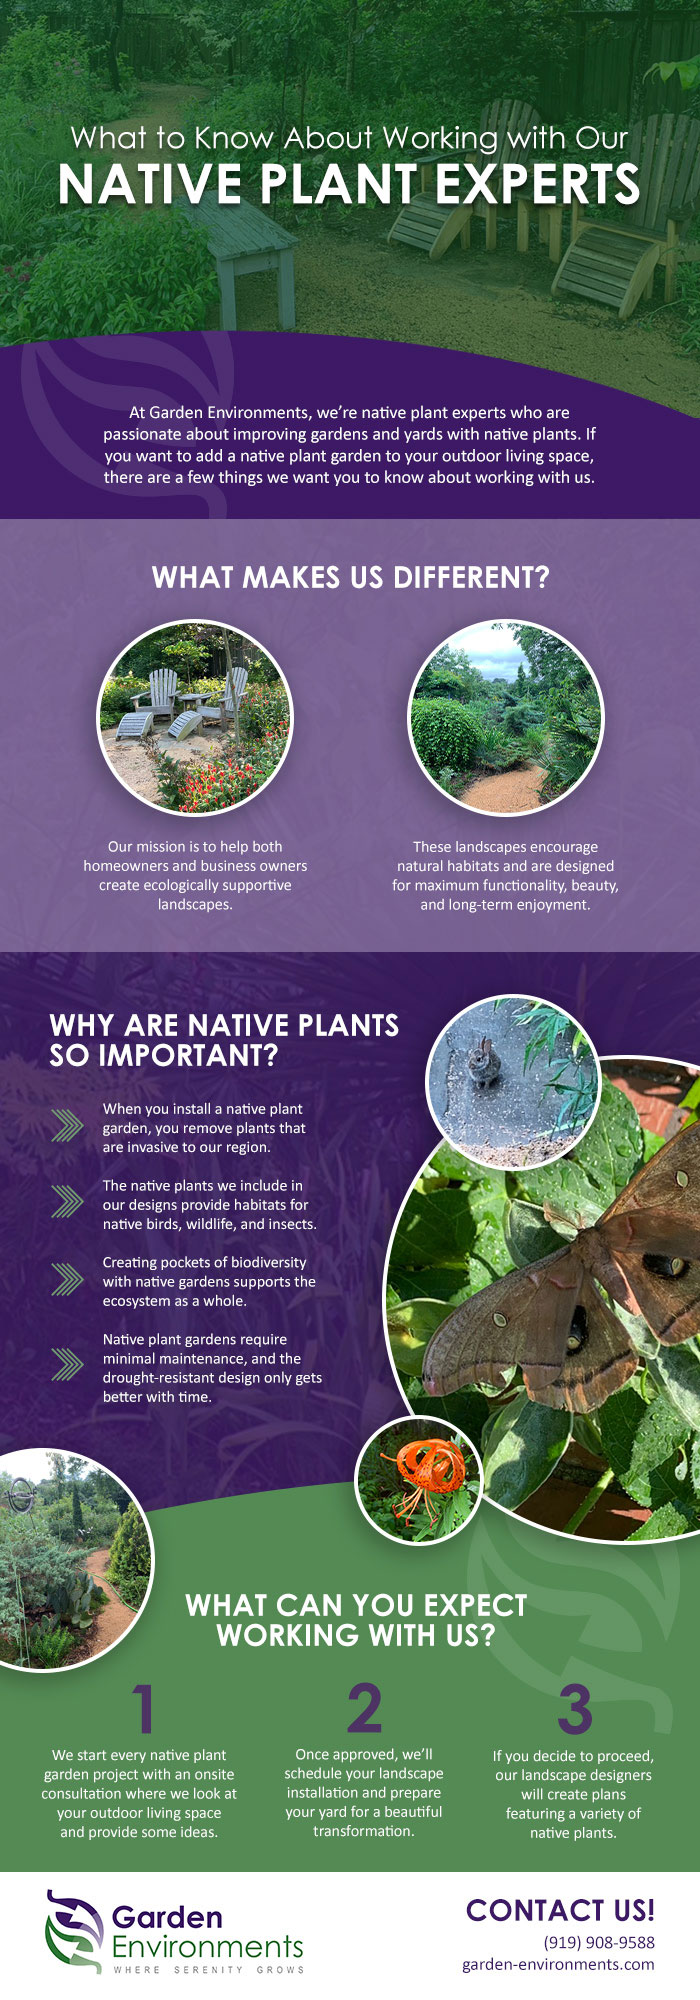 Learn About the Benefits of Working with Experts in Native Plants